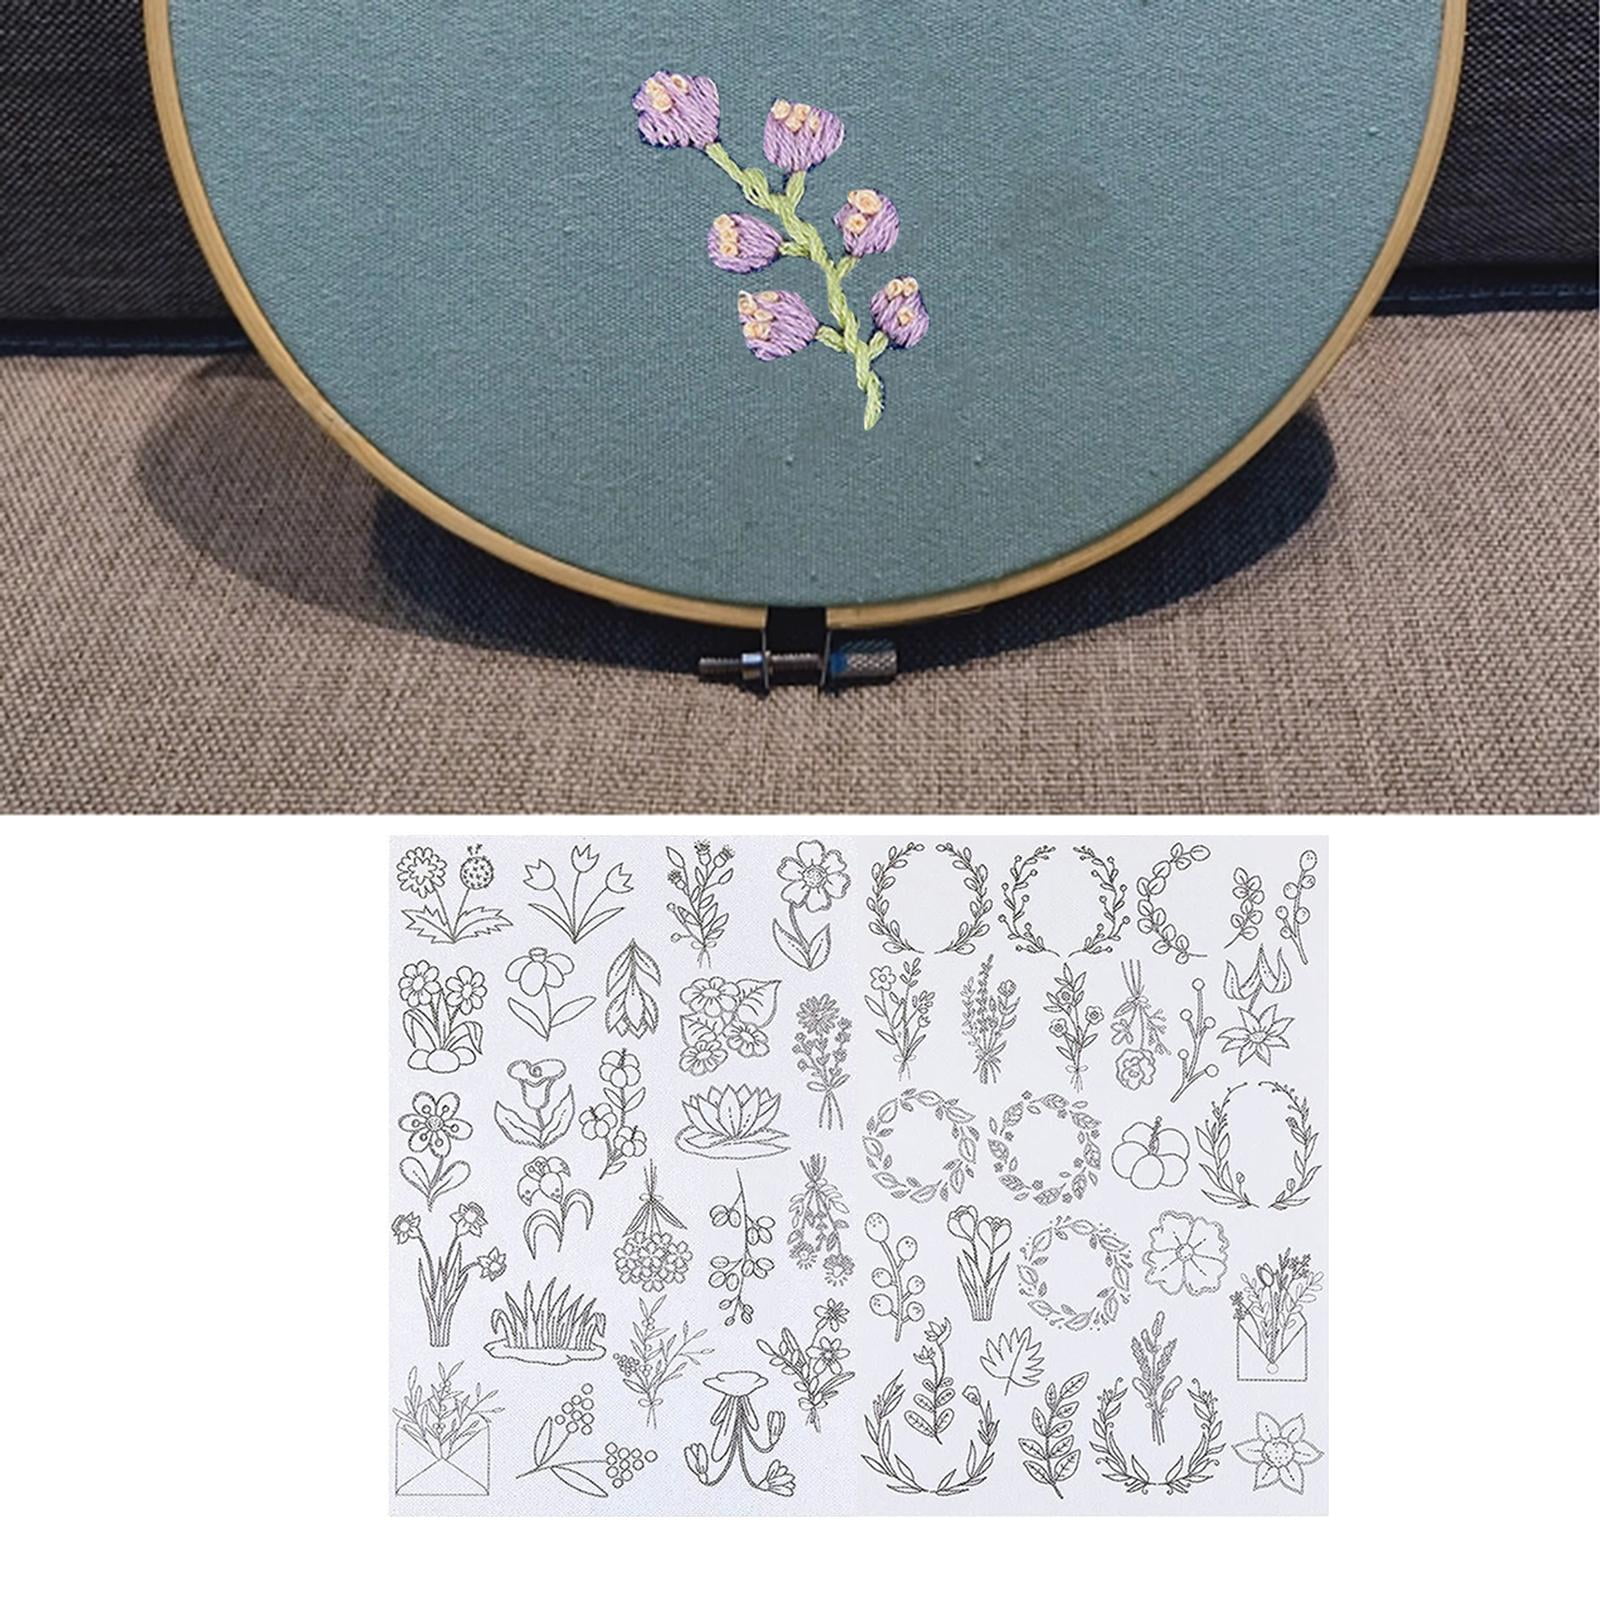 2Pcs/set Water Soluble Embroidery Paper Stabiliser with Flower Patterns  Hand Sewing Water Soluble Film DIY